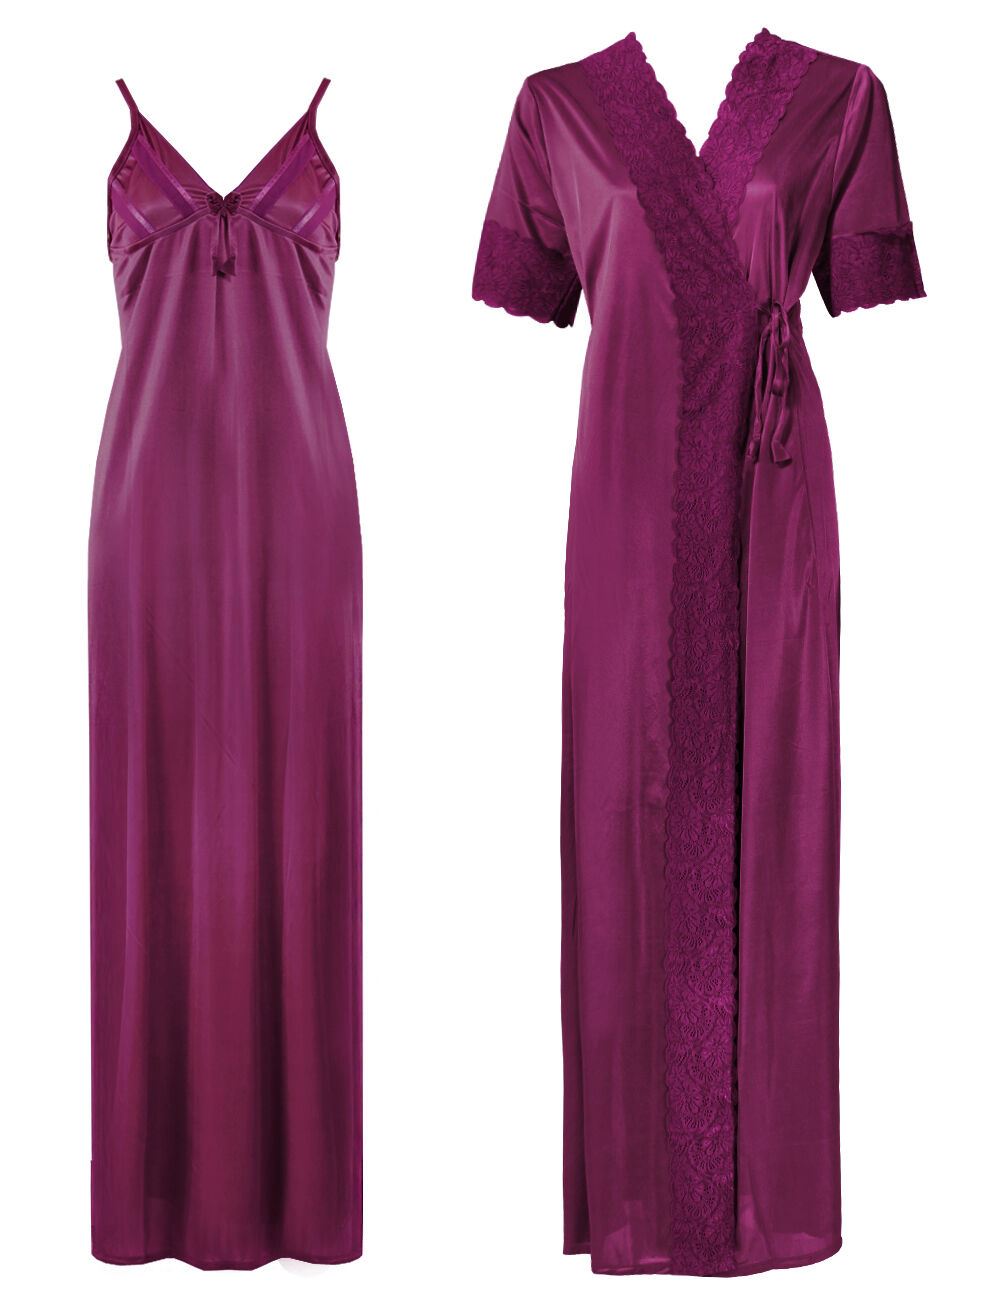 Purple / One Size: Regular Satin Long Strappy Nighty and Robe 2 Pcs Set The Orange Tags